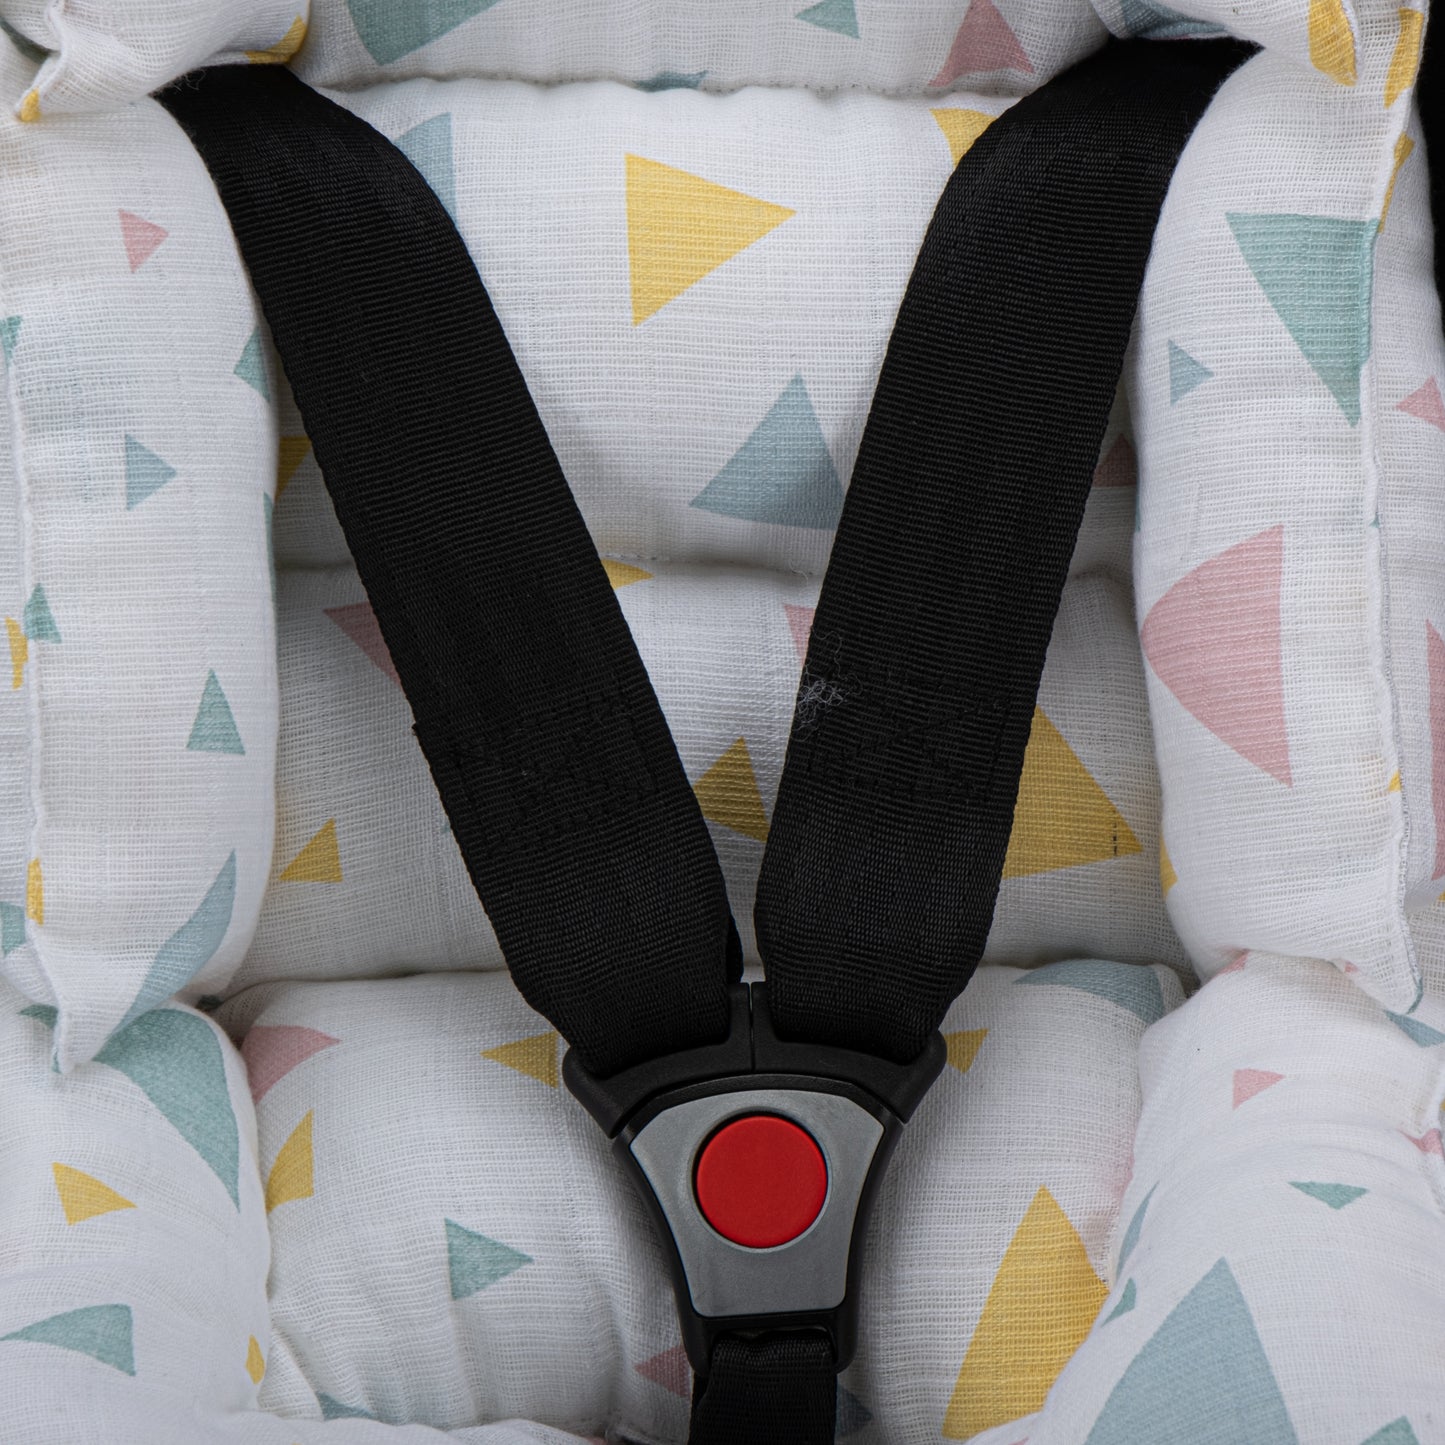 Stroller Cover Set - Double Side - Yellow Muslin - Colored Triangles